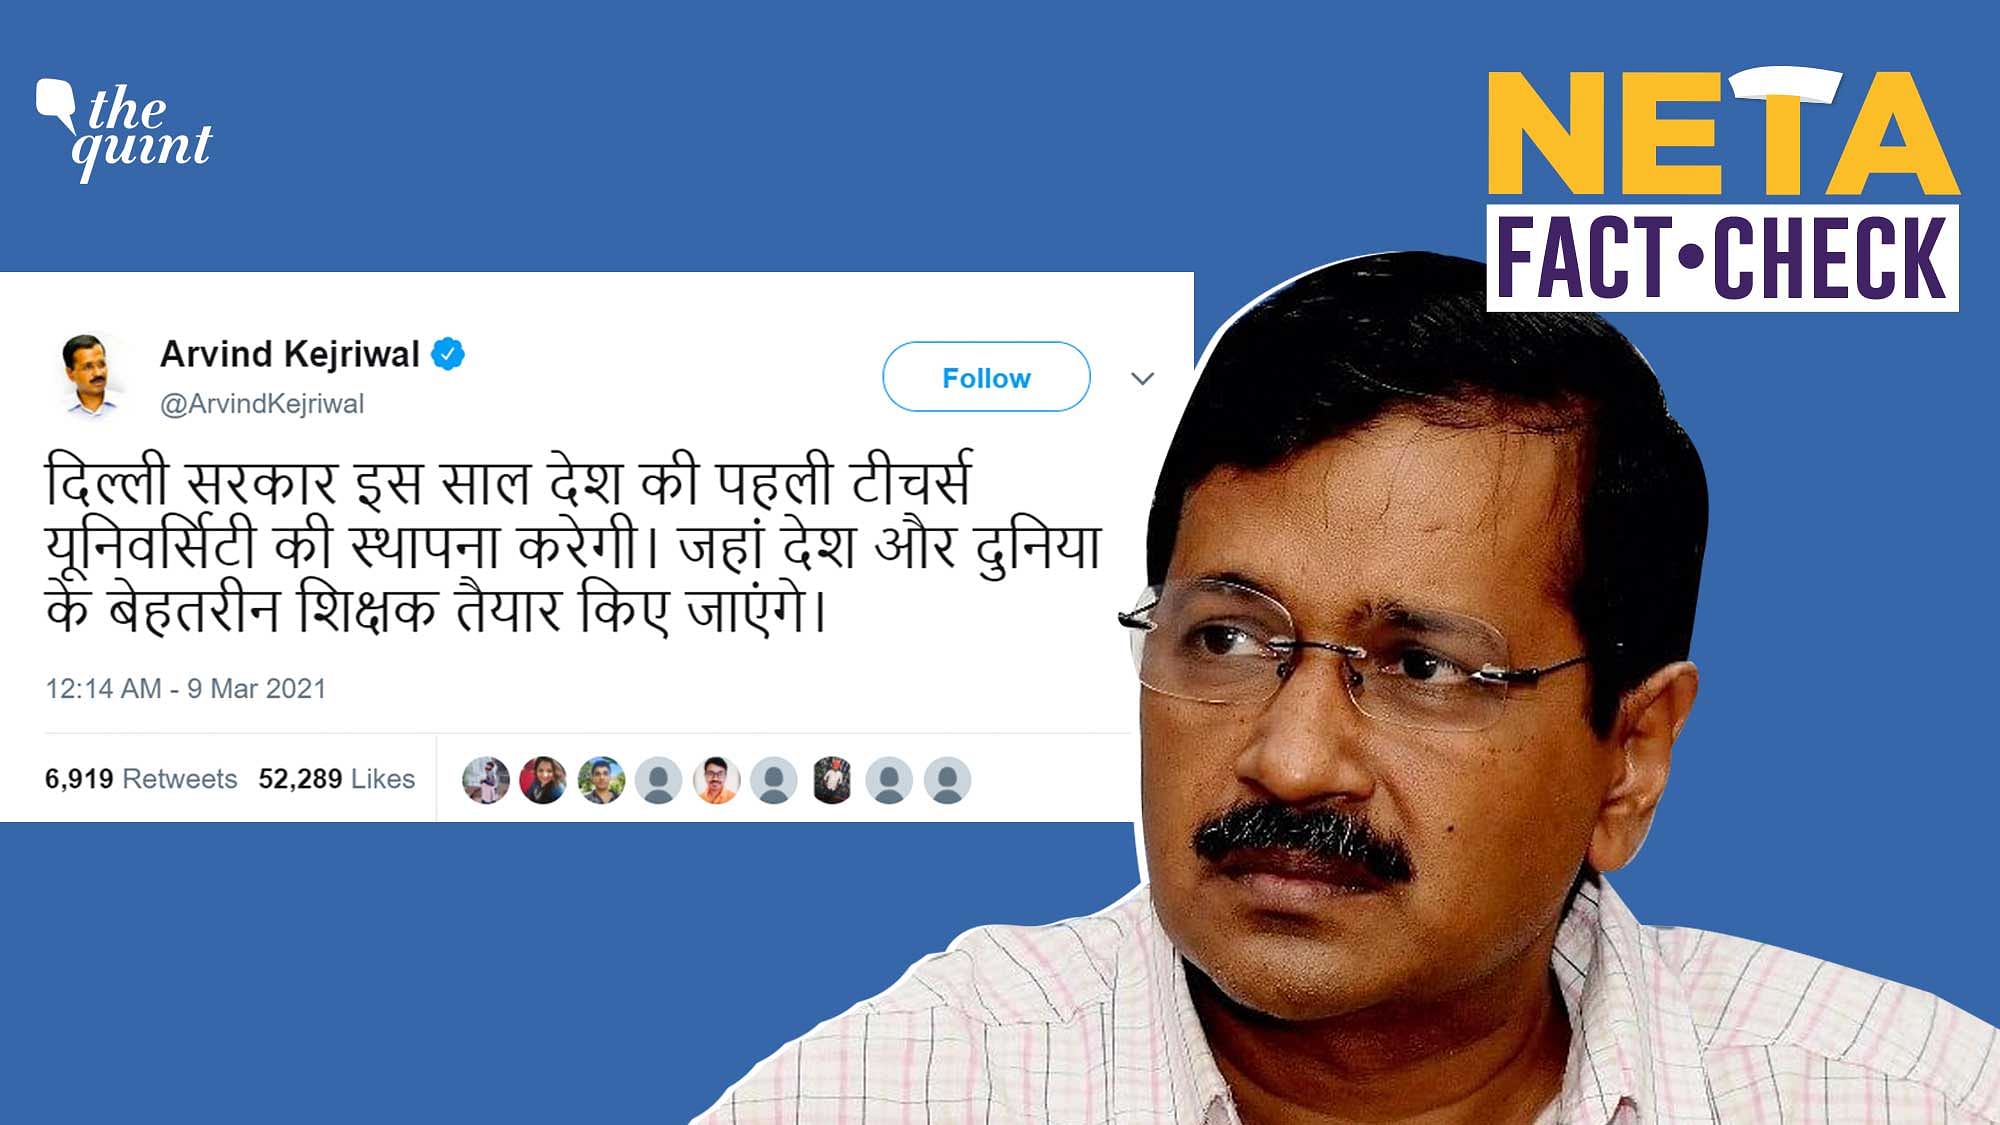 Delhi CM Kejriwal’s statement that Delhi will have the country’s first teachers’ university is misleading.